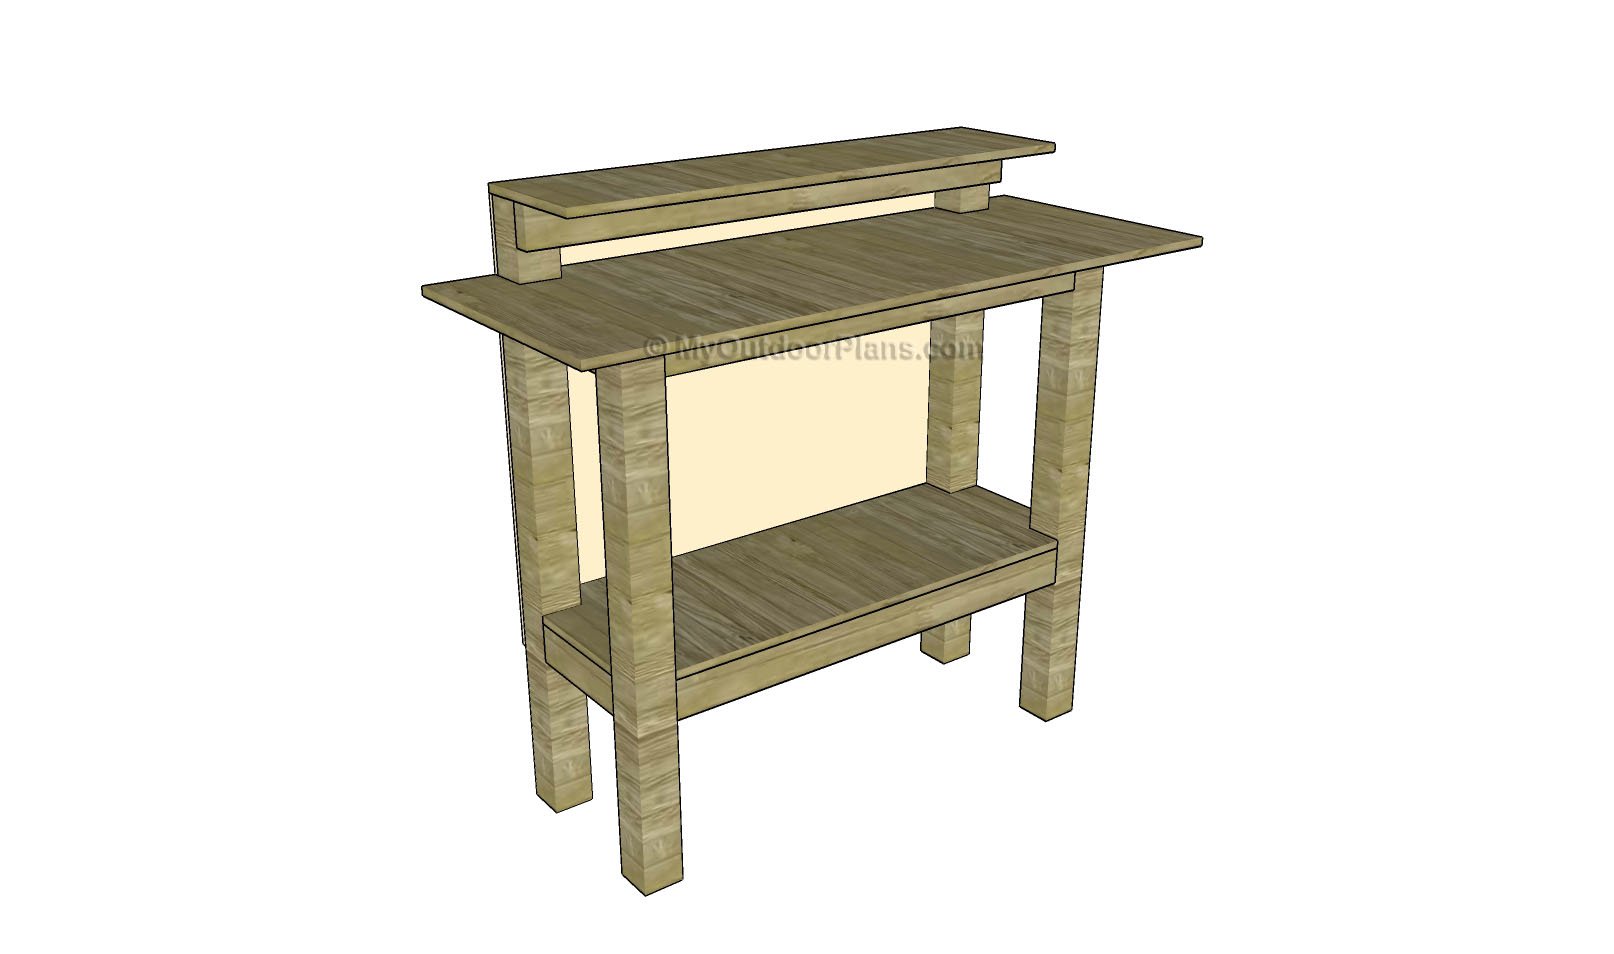 Stand Up Desk Plans | Free Outdoor Plans - DIY Shed, Wooden Playhouse ...